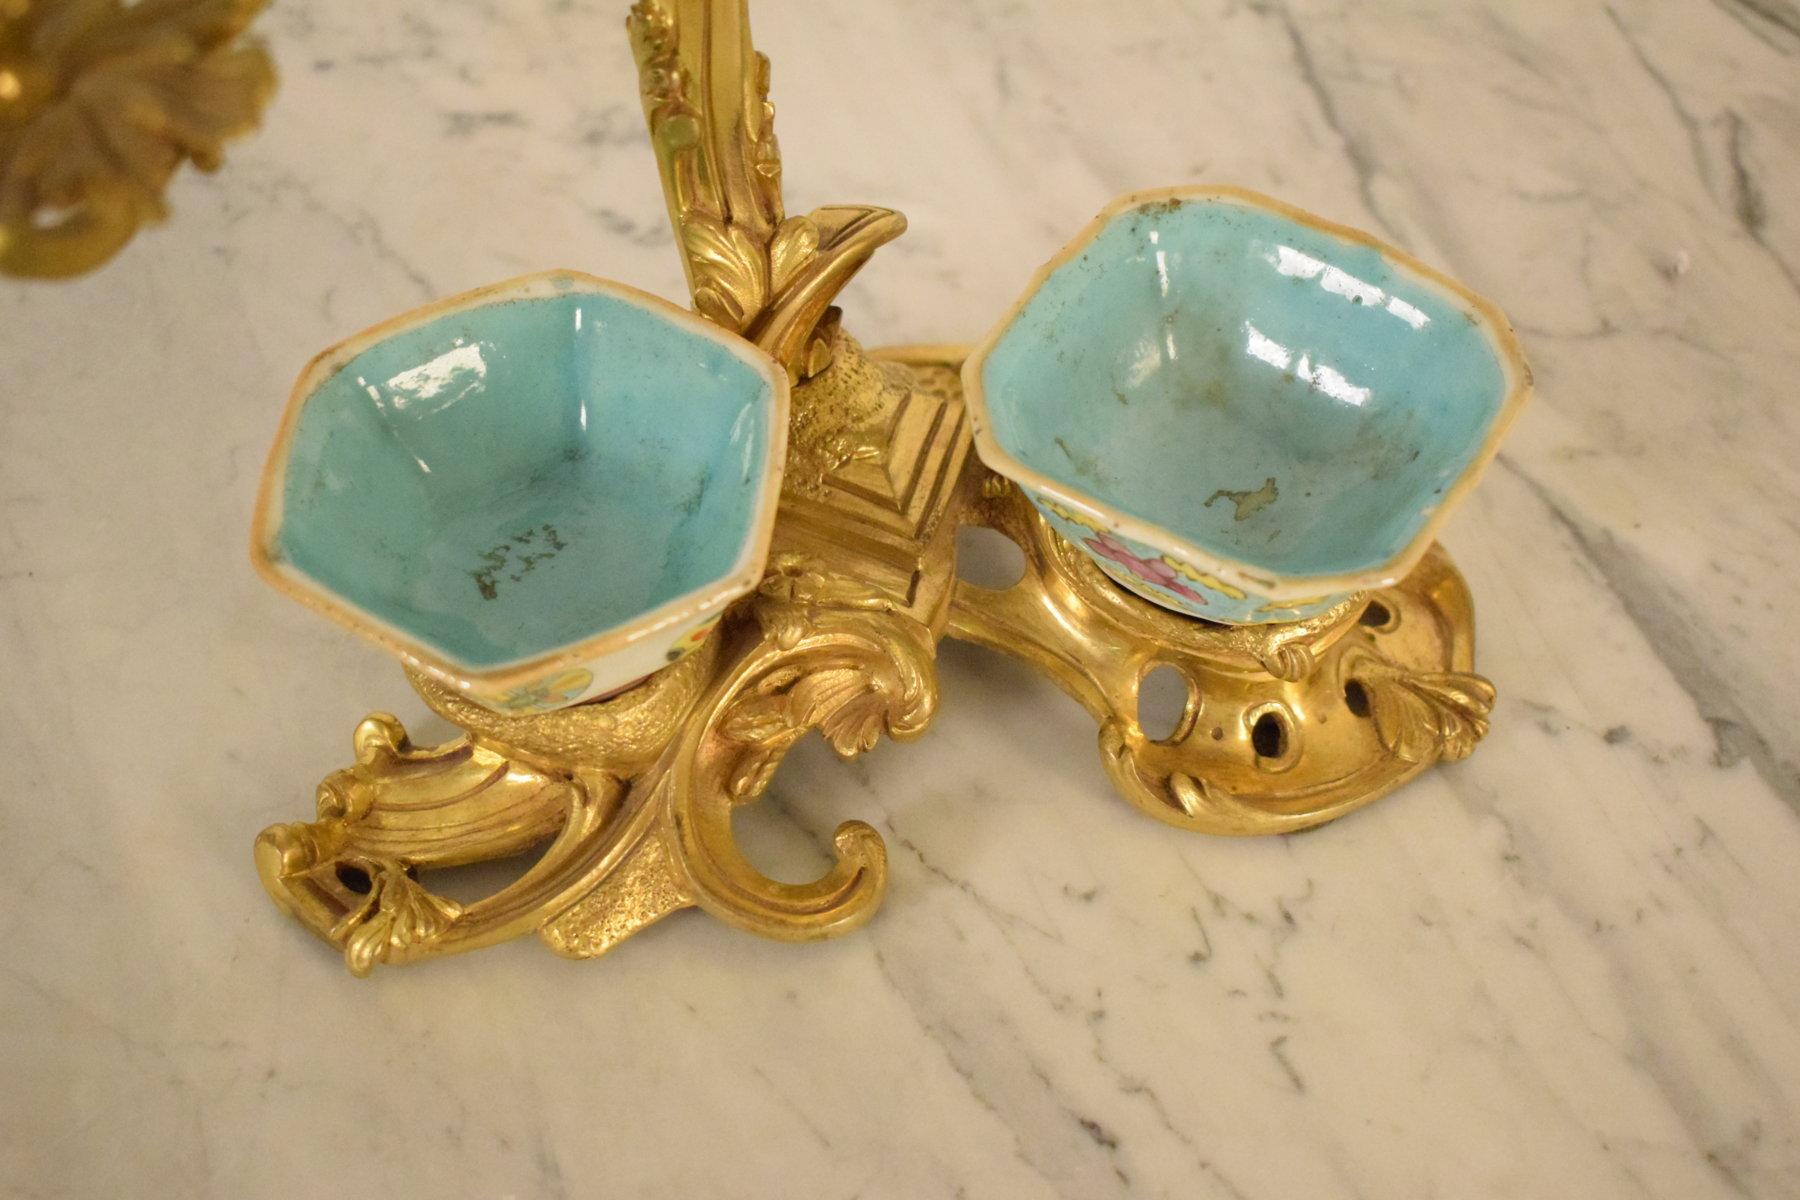 19th Century French Gilt Bronze Desk Candlestick with Cinese Ceramic Inkwell  3